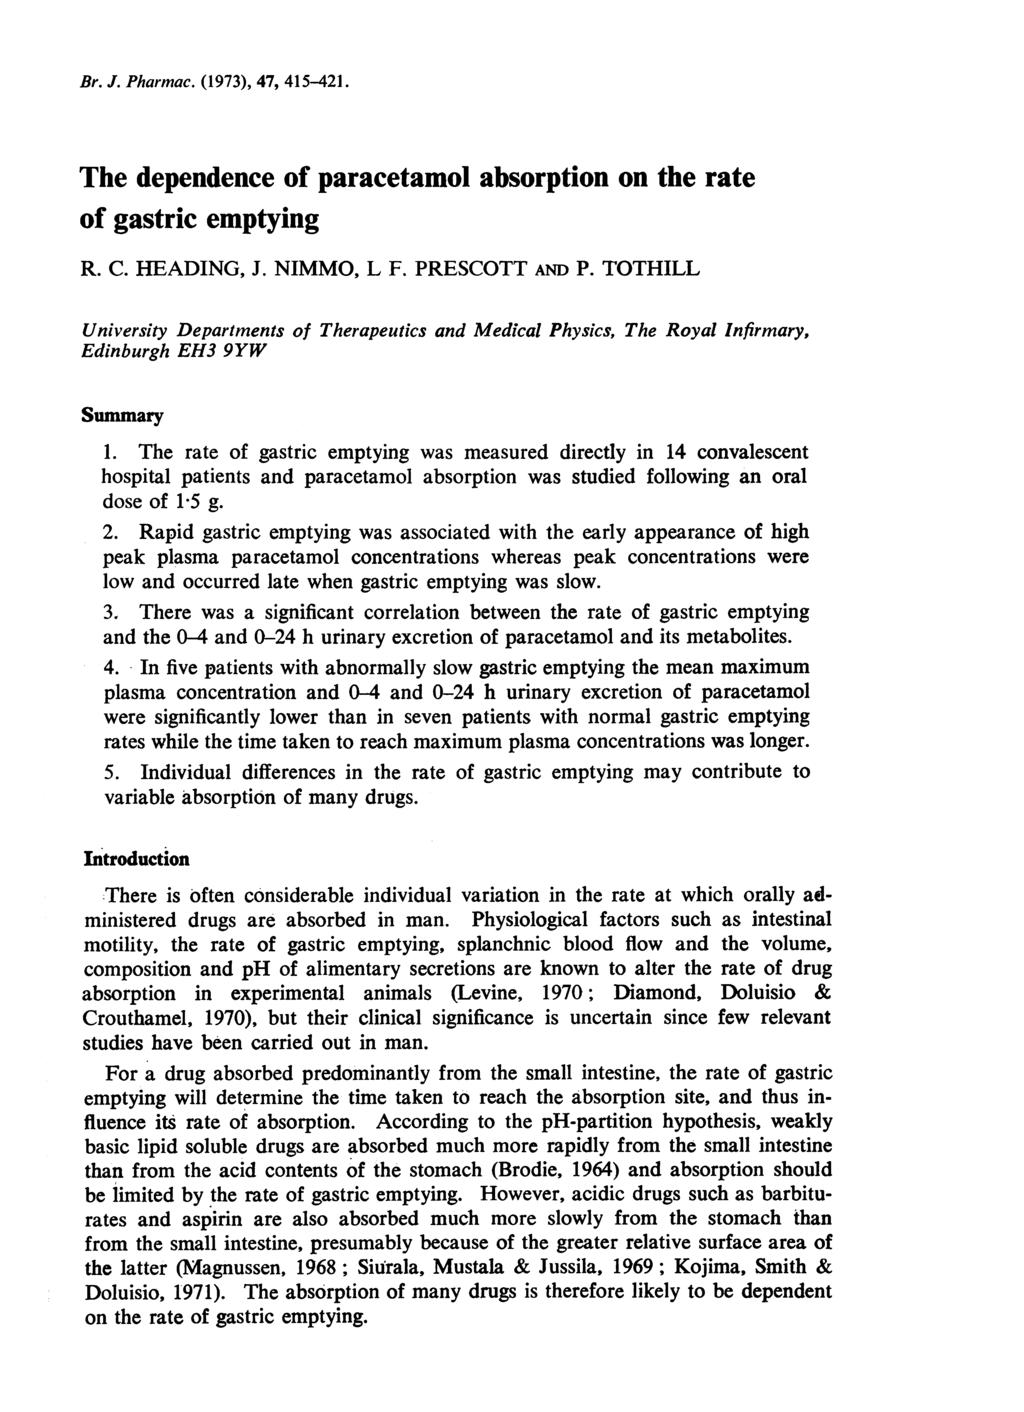 Br. J. Pharmac. (1973), 47, 415-421. The dependence of paracetamol absorption on the rate of gastric emptying R.. HADING, J. NIMMO, L F. PRSOTT AND P.